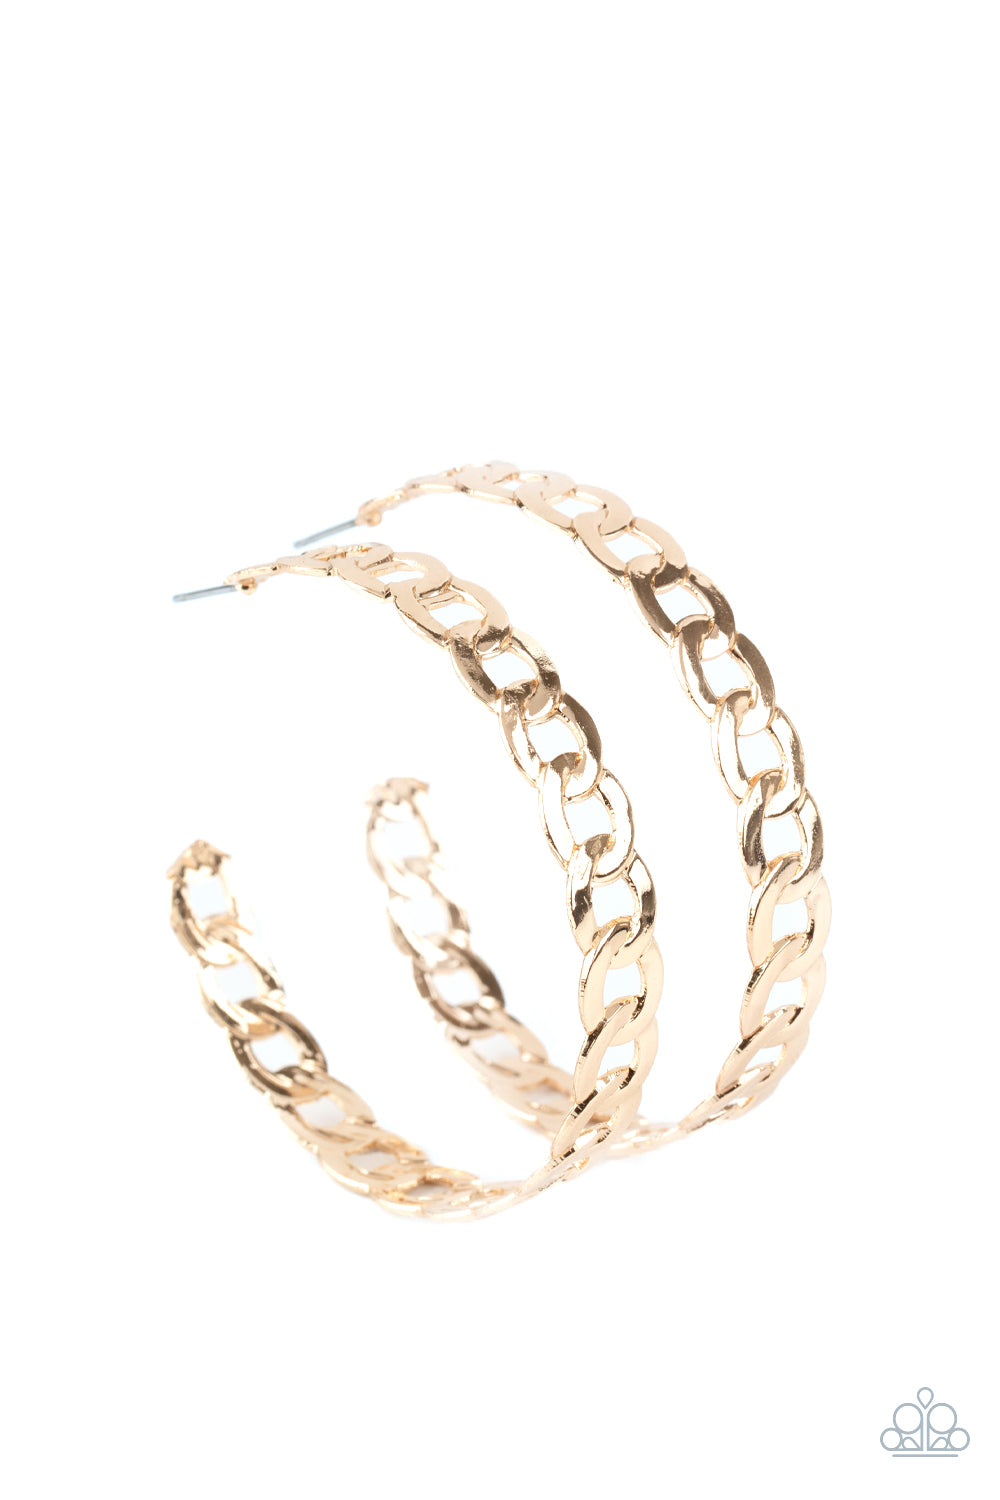 Climate CHAINge - Gold Earrings